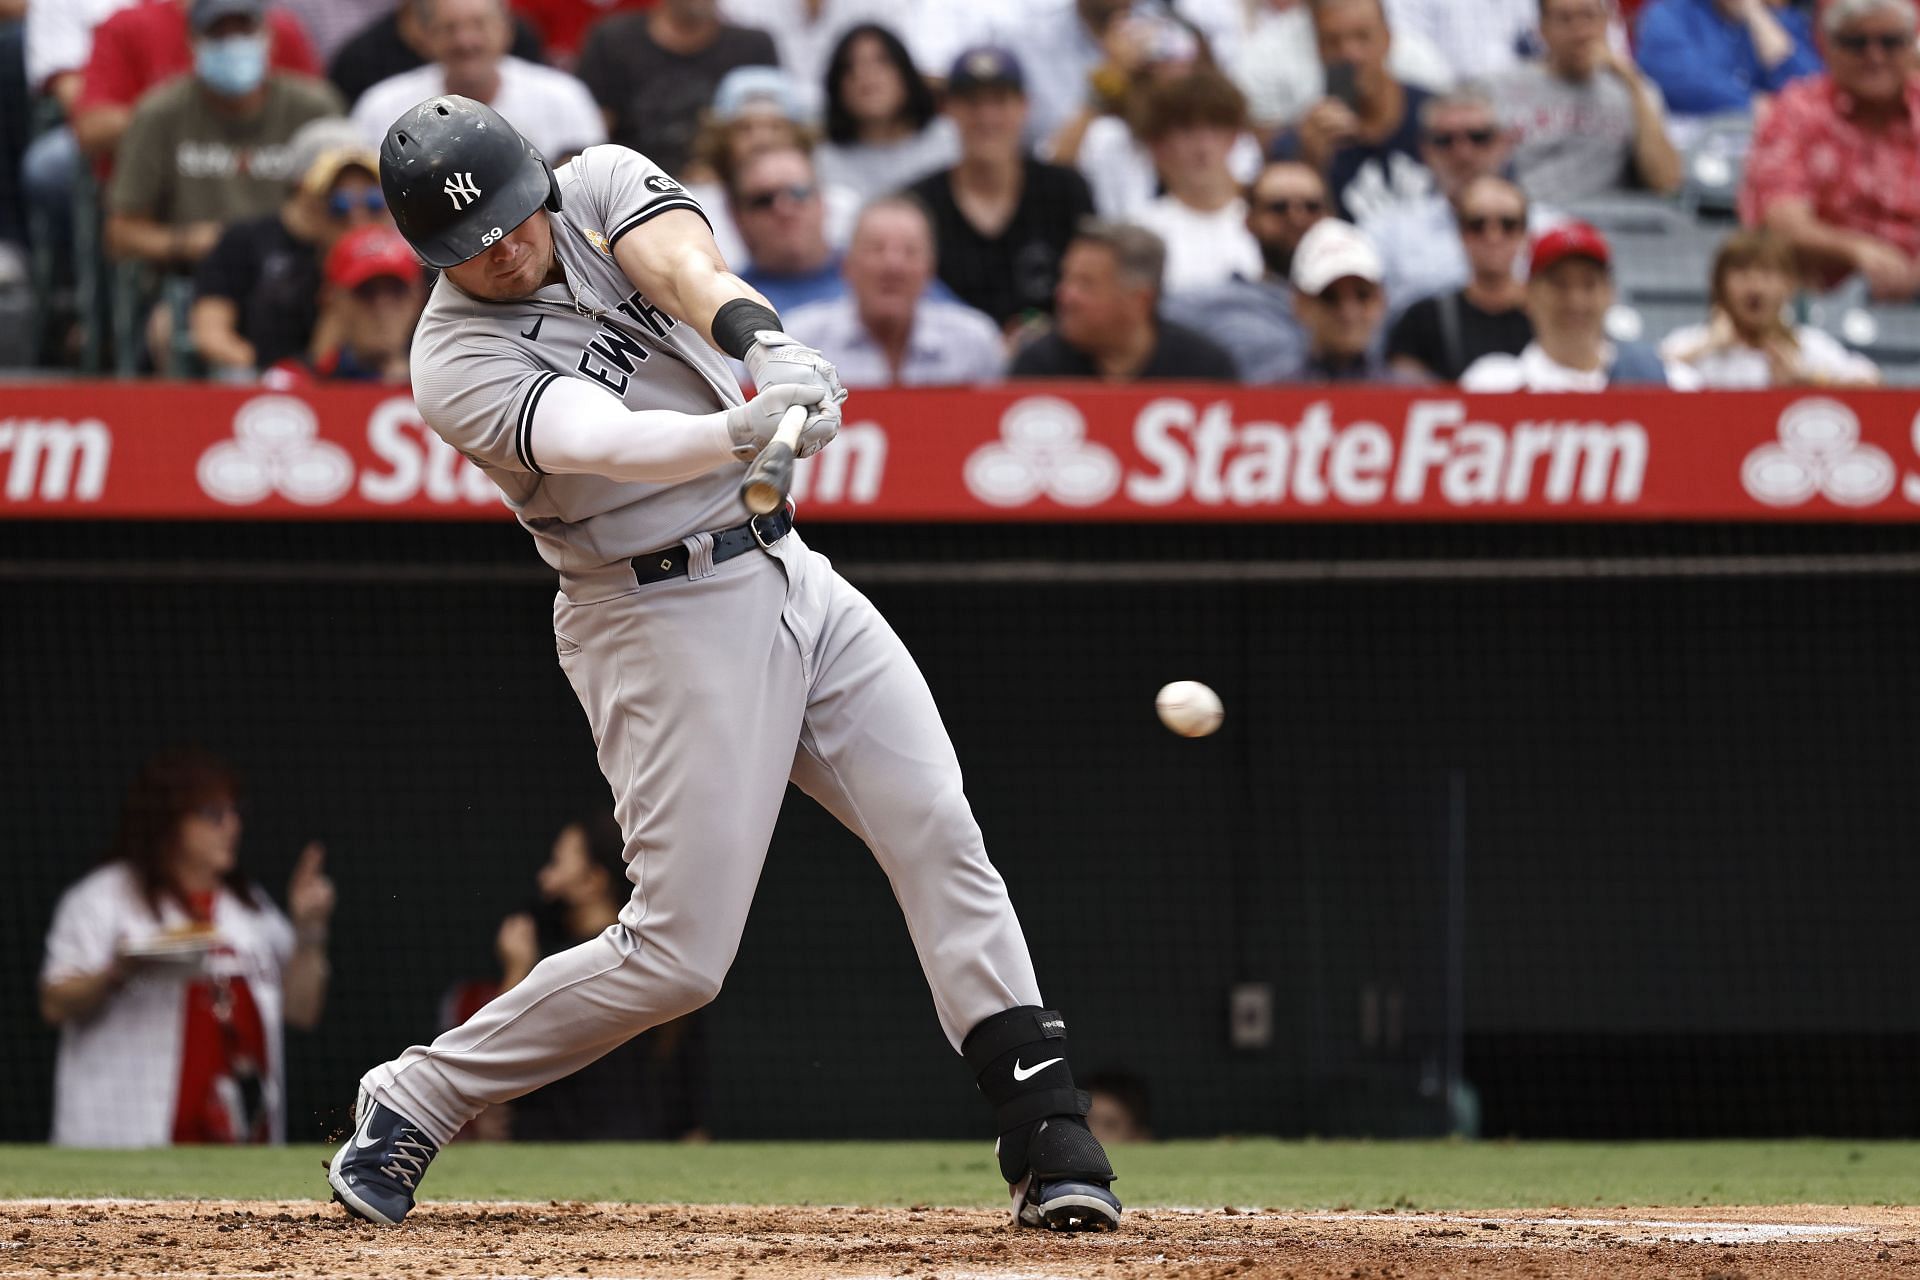 Luke Voit swings at a pitch during a New York Yankees v Los Angeles Angels game